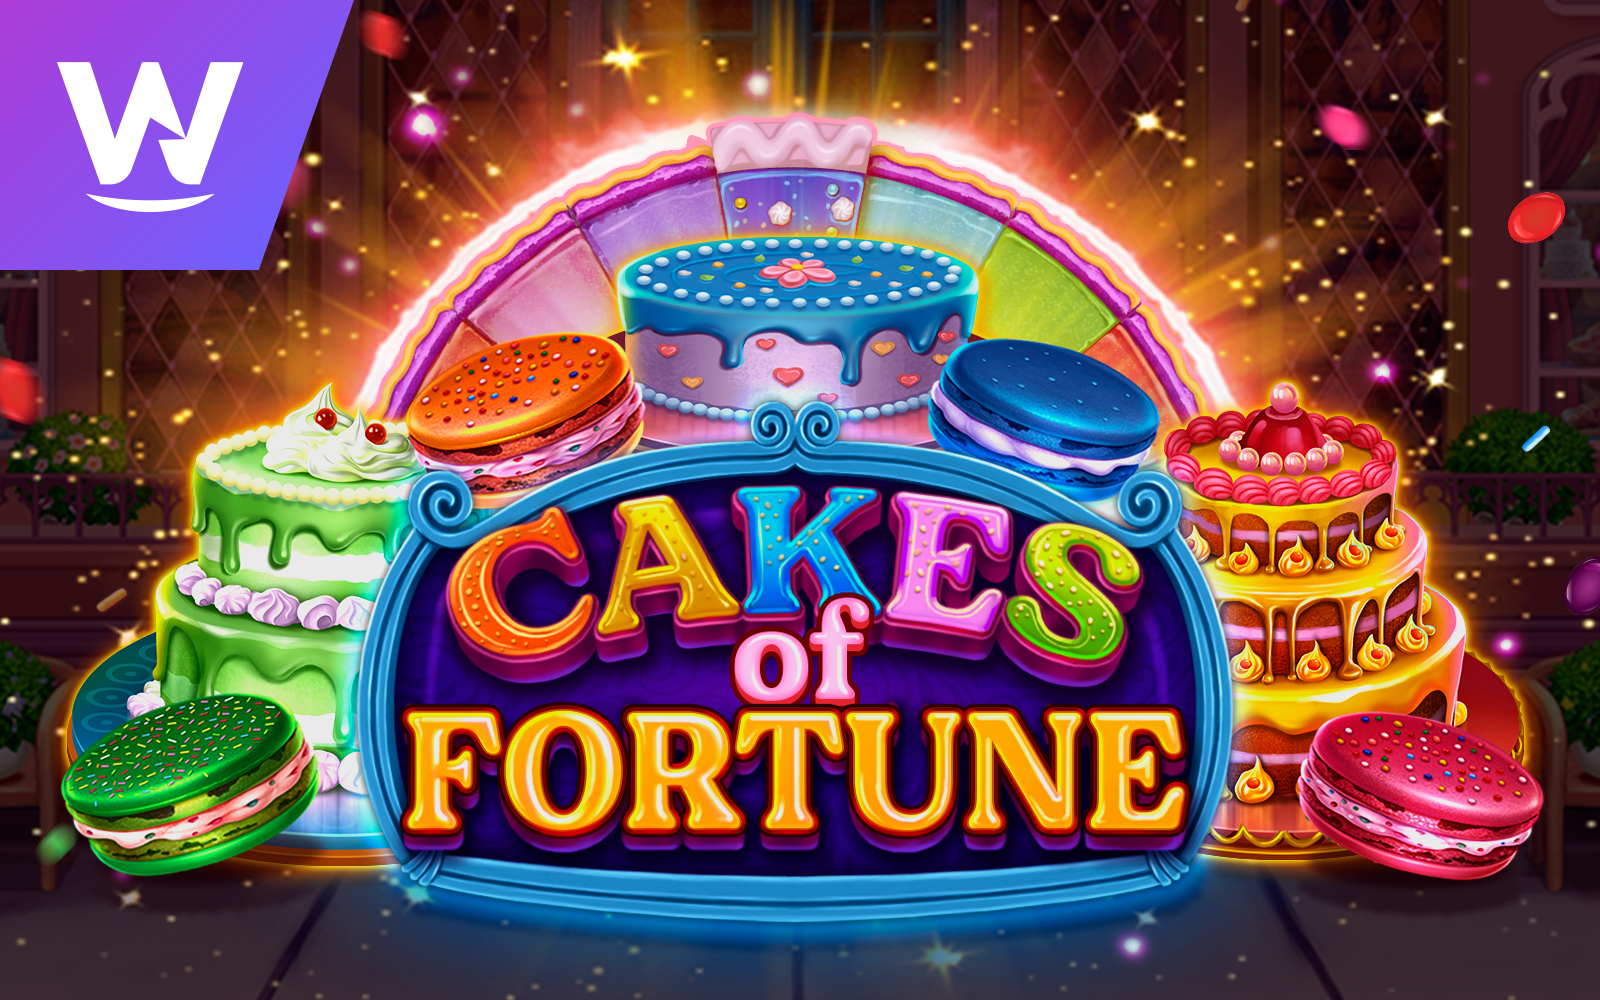 Wizard Games produces delicious treat with Cakes of Fortune